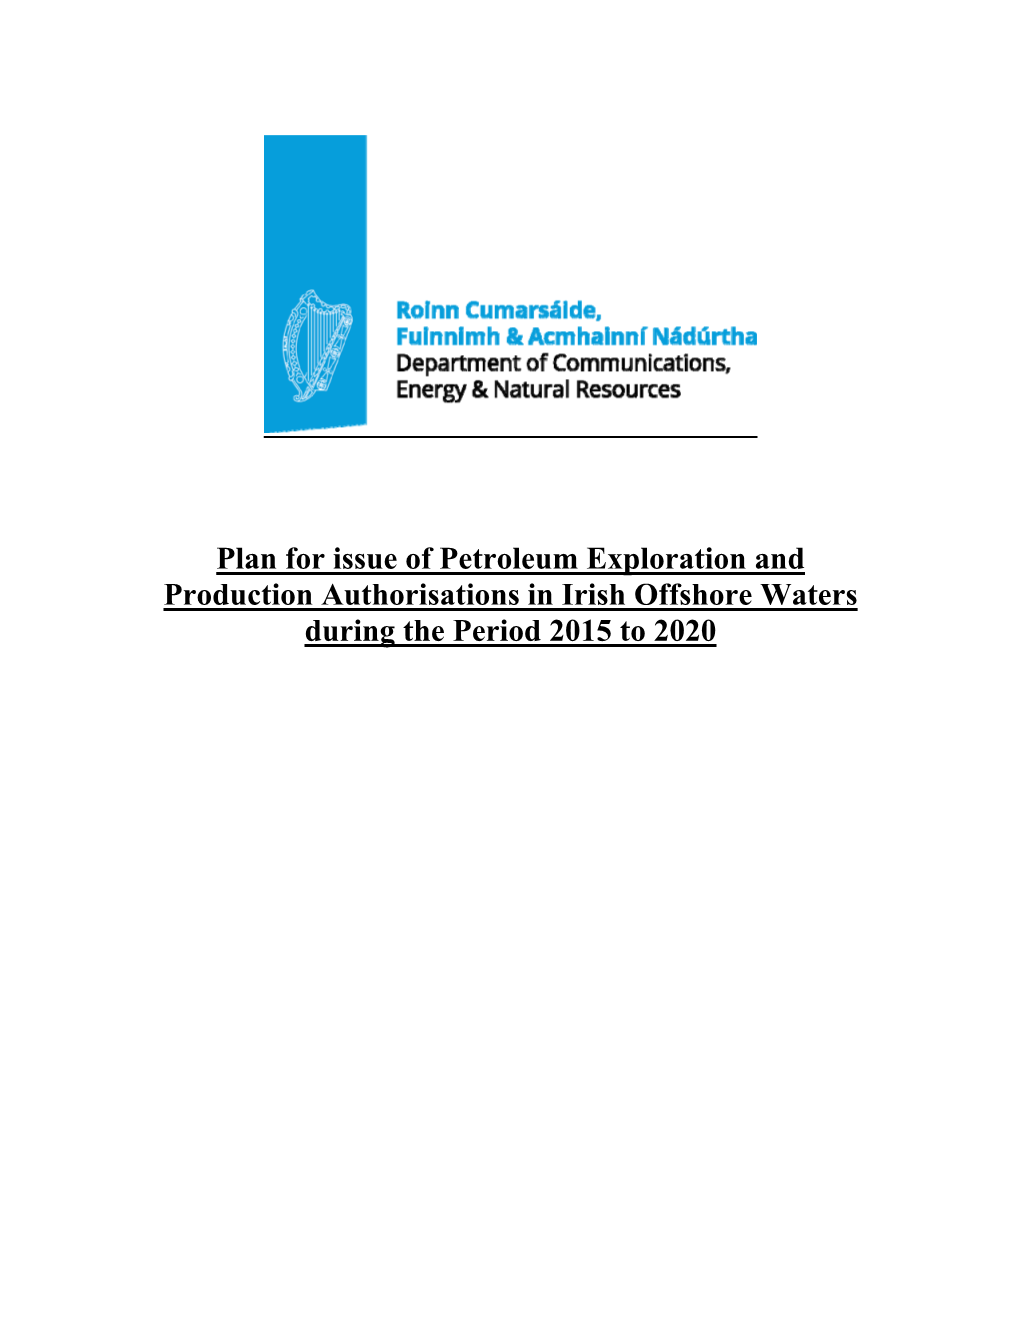 Plan for Issue of Petroleum Exploration and Production Authorisations in Irish Offshore Waters During the Period 2015 to 2020